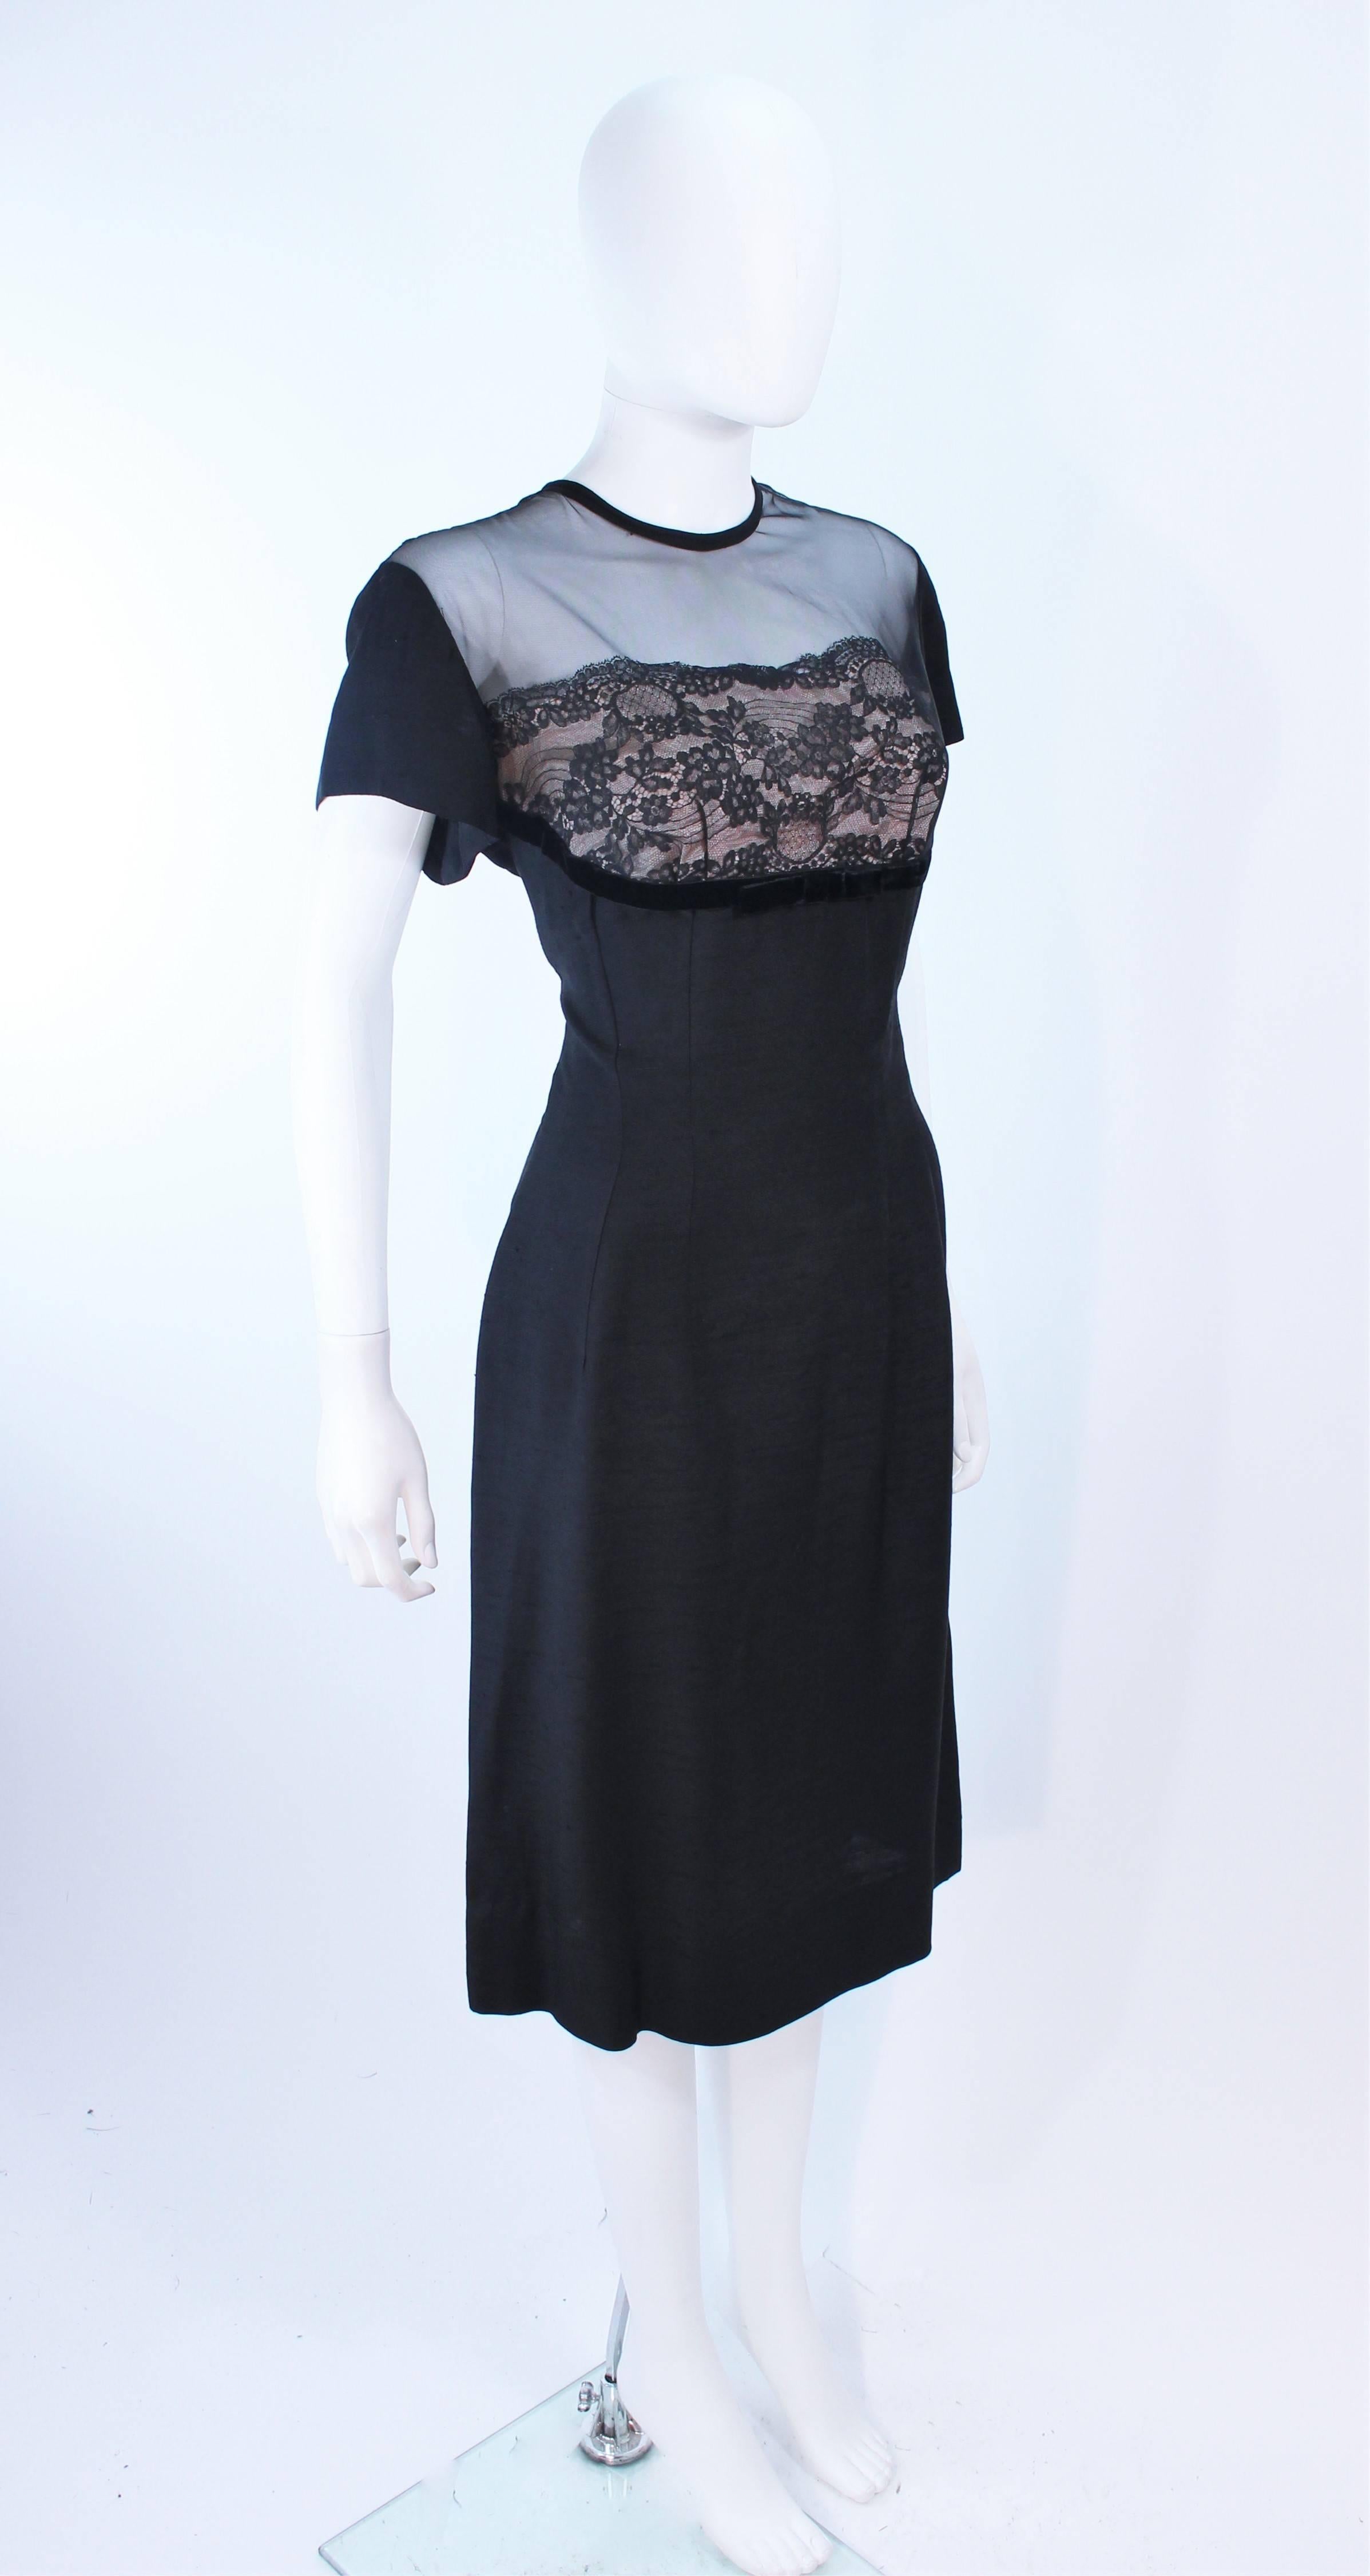 J. HARLAN Black Silk and Lace Cocktail Dress with Sheer Details Size 8 For Sale 1